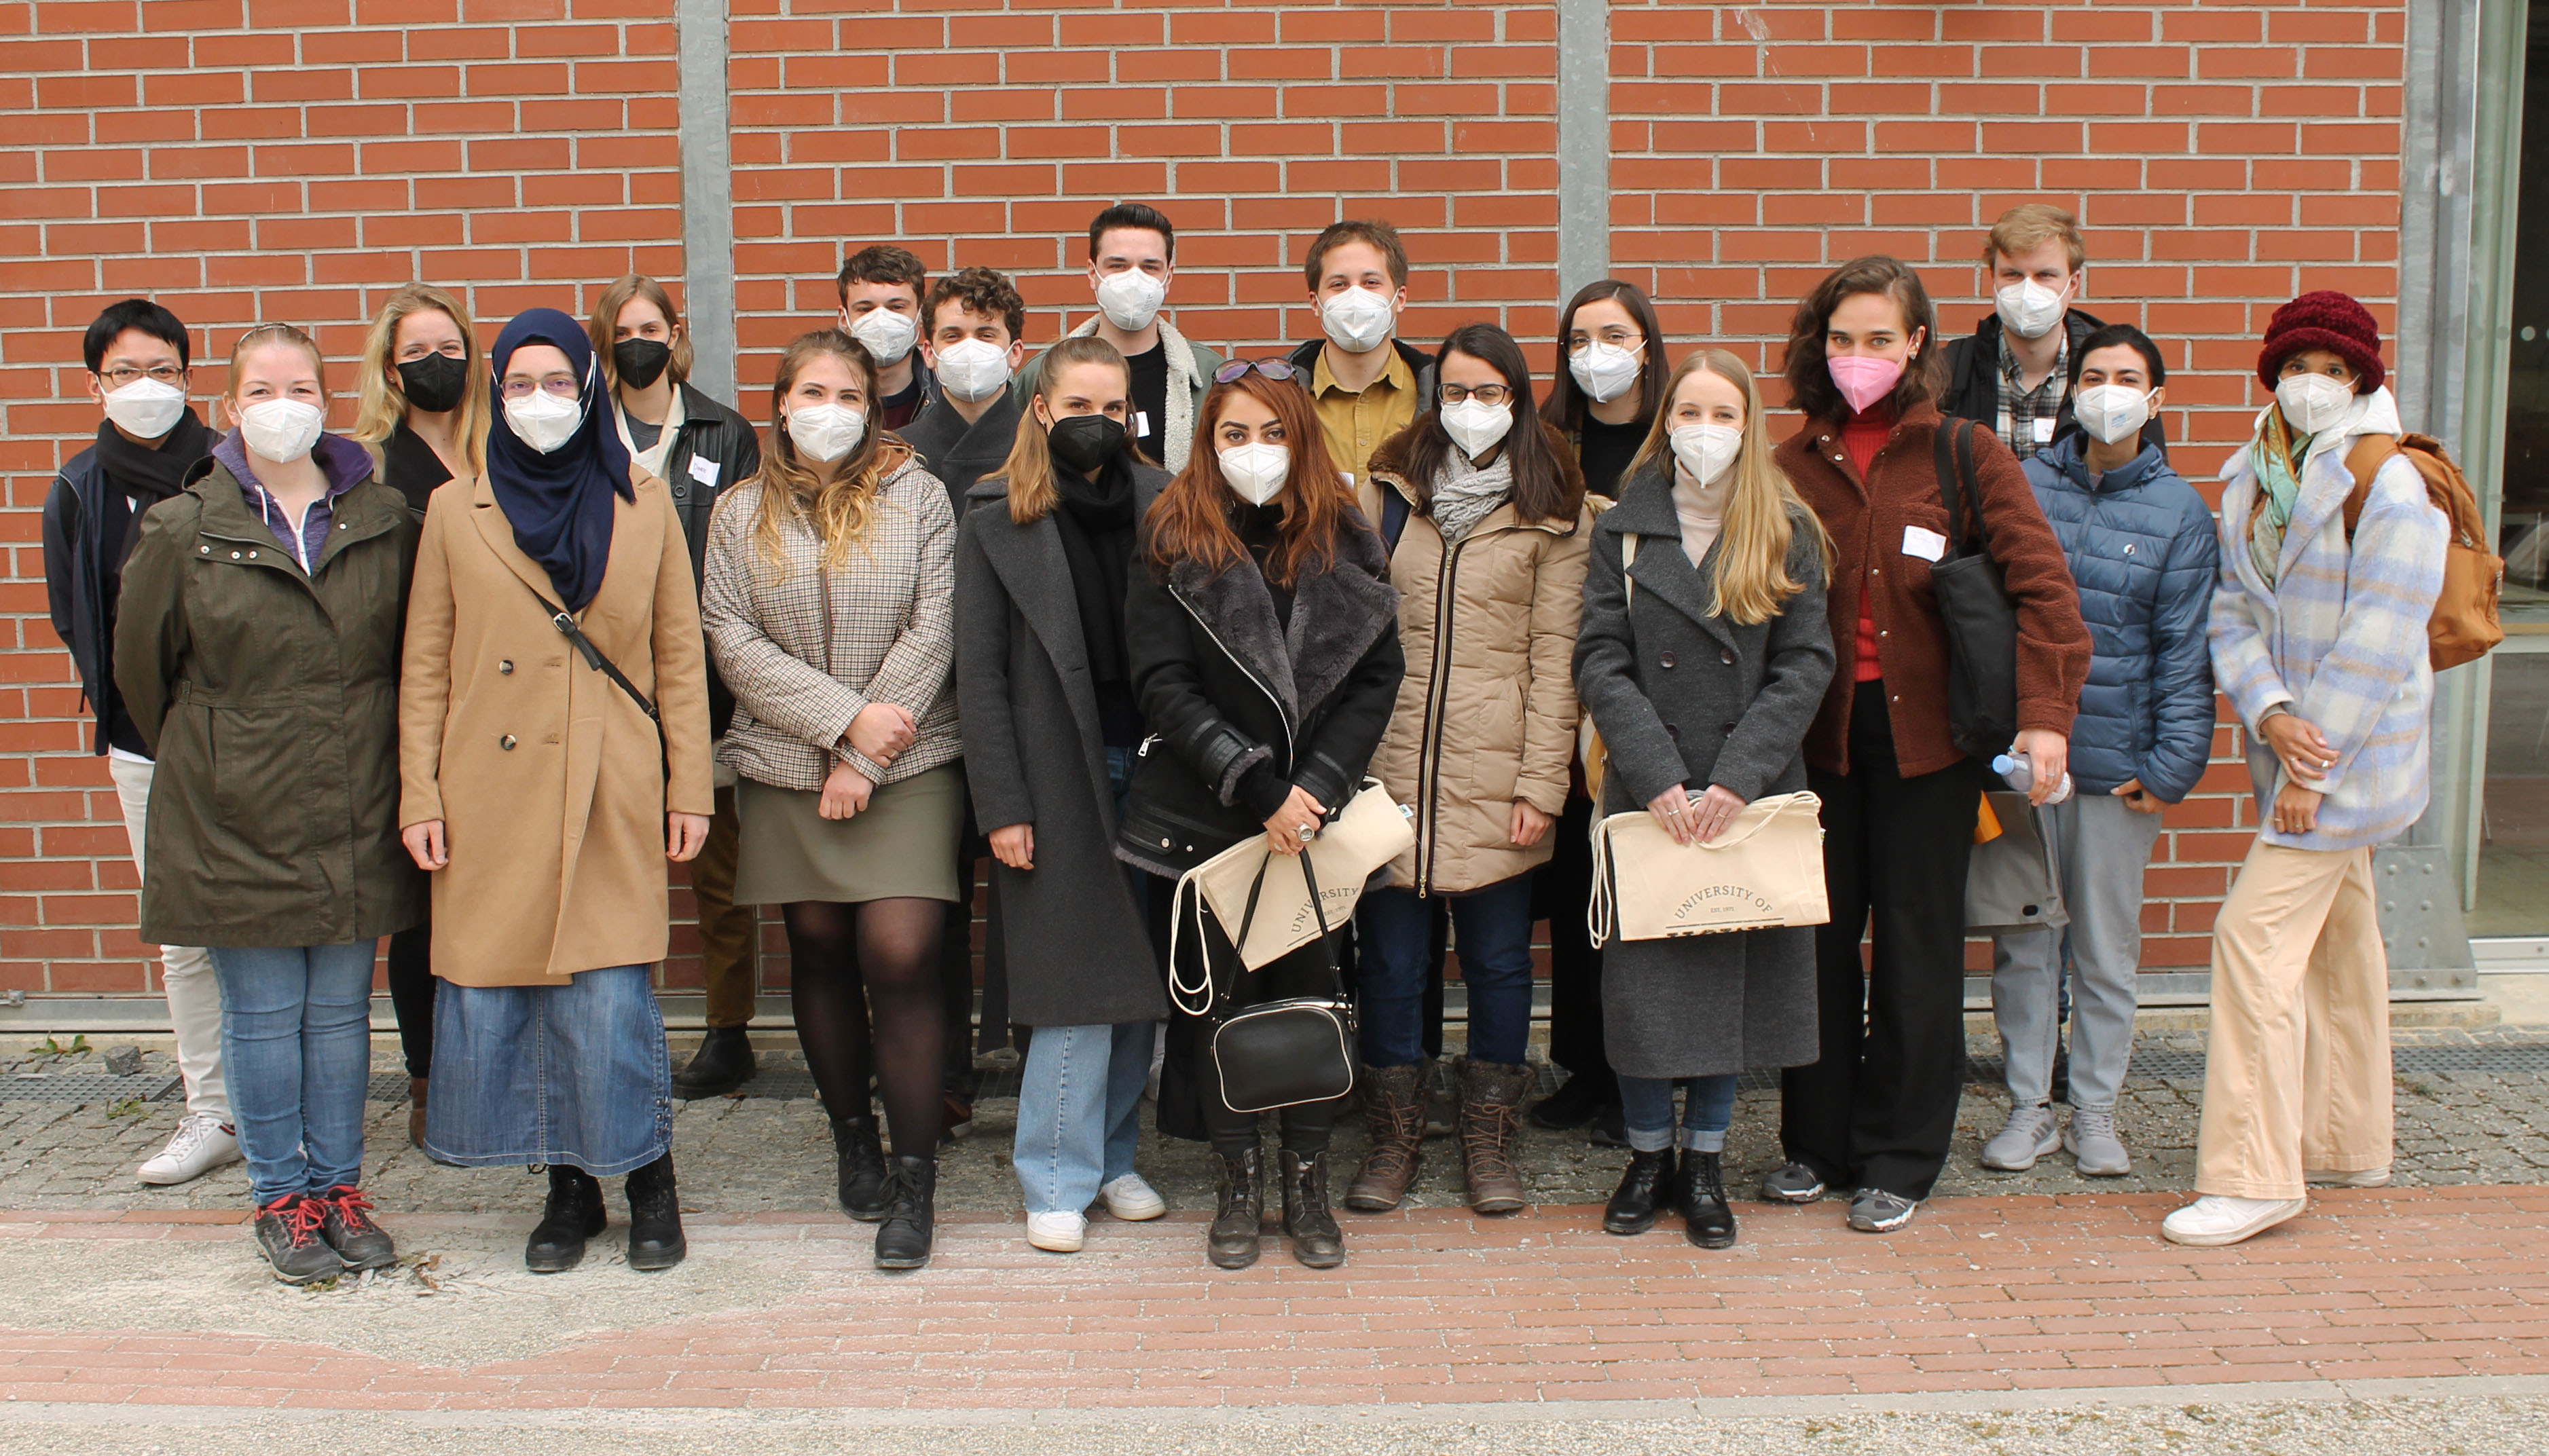 Photo group students with masks, on pavement, background house wall